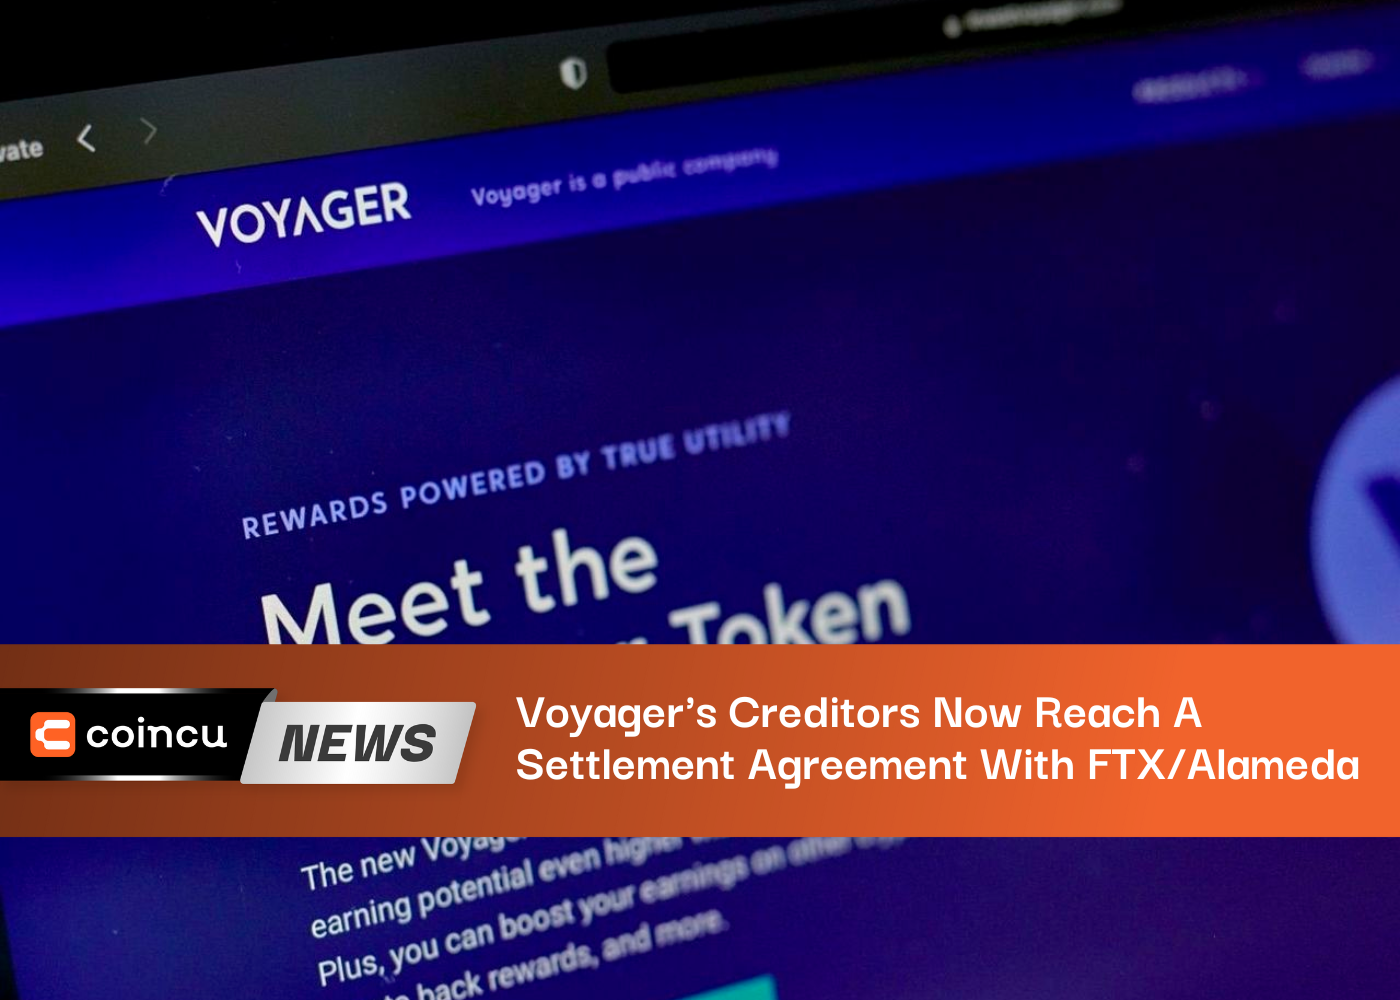 Voyager's Creditors Now Reach A Settlement Agreement With FTX/Alameda